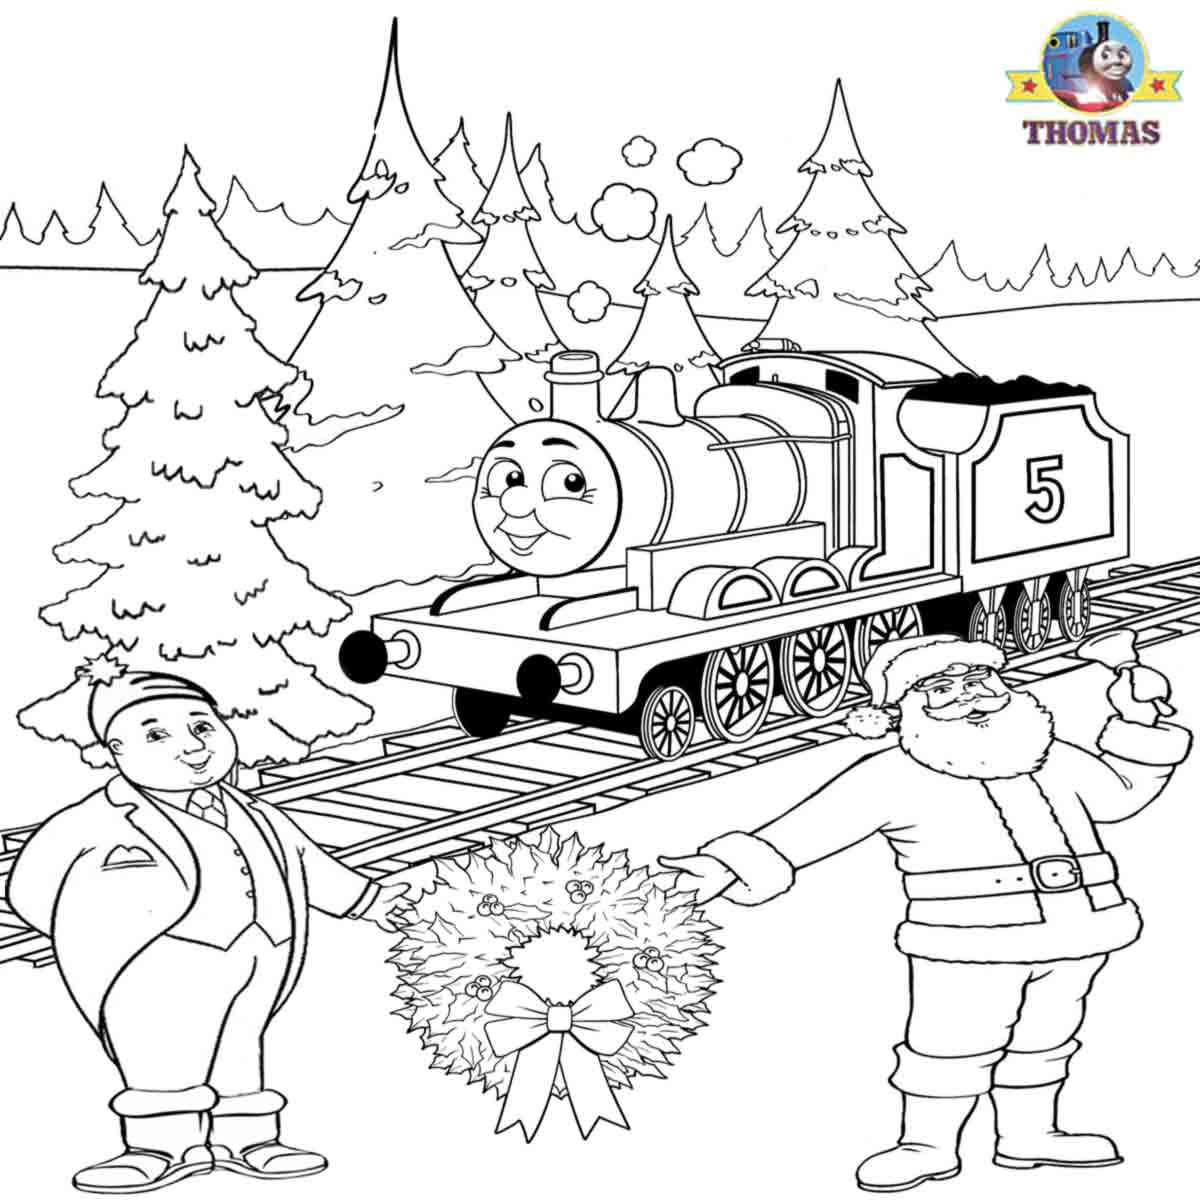 Let It Snow Coloring Pages Thomas Christmas Coloring Sheets For Children Printable Pictures